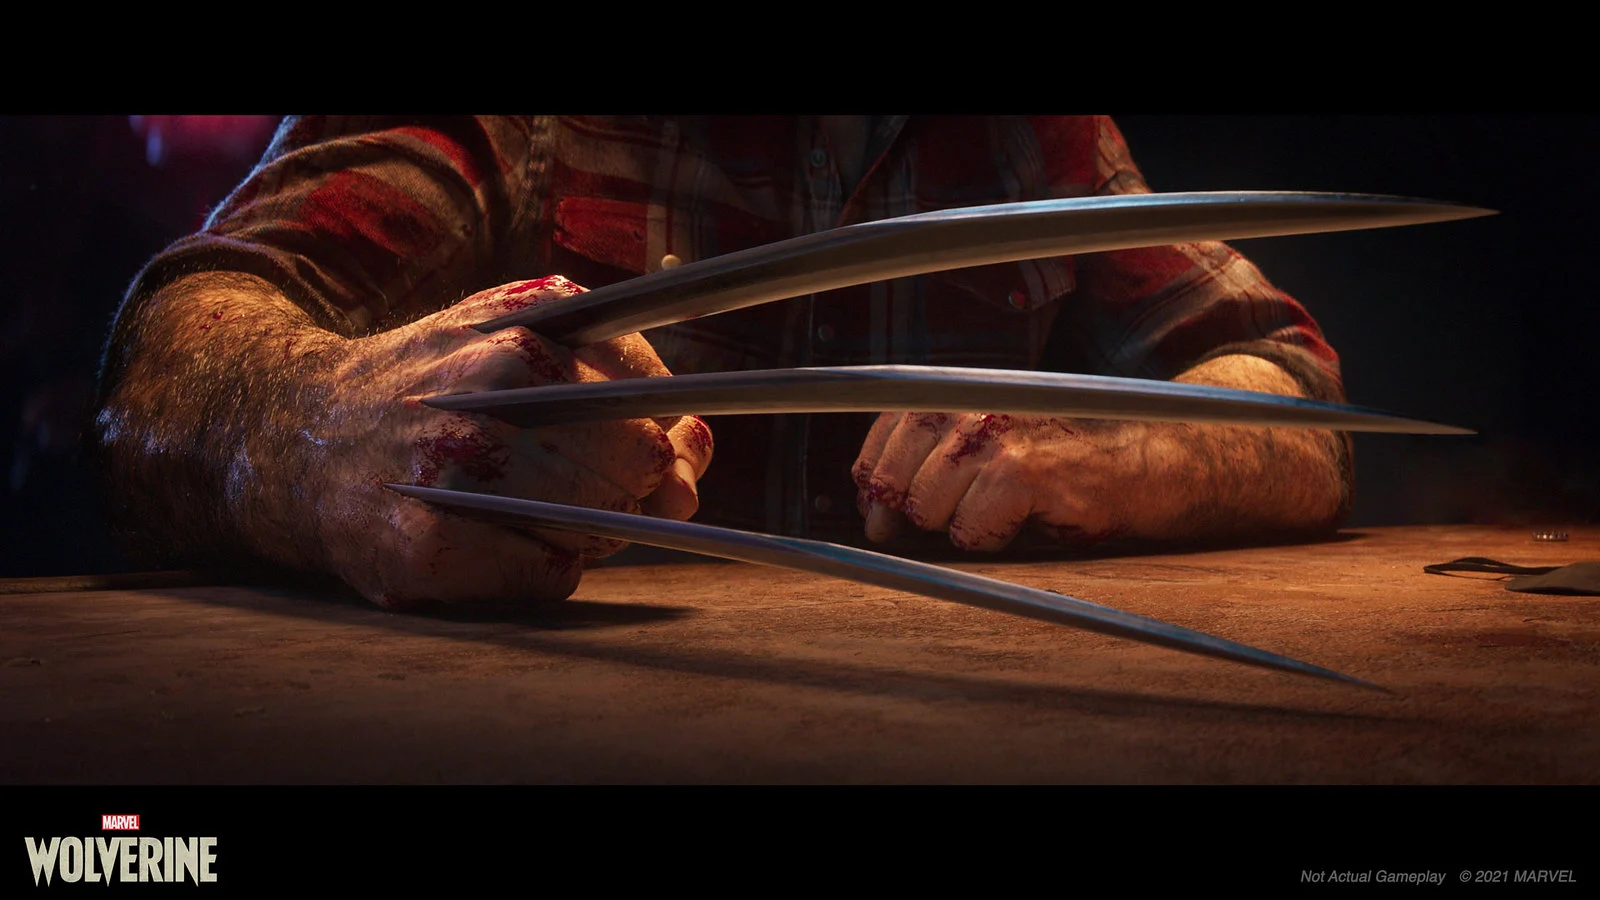 Marvel's Wolverine, Wolverine game to be M-Rated.